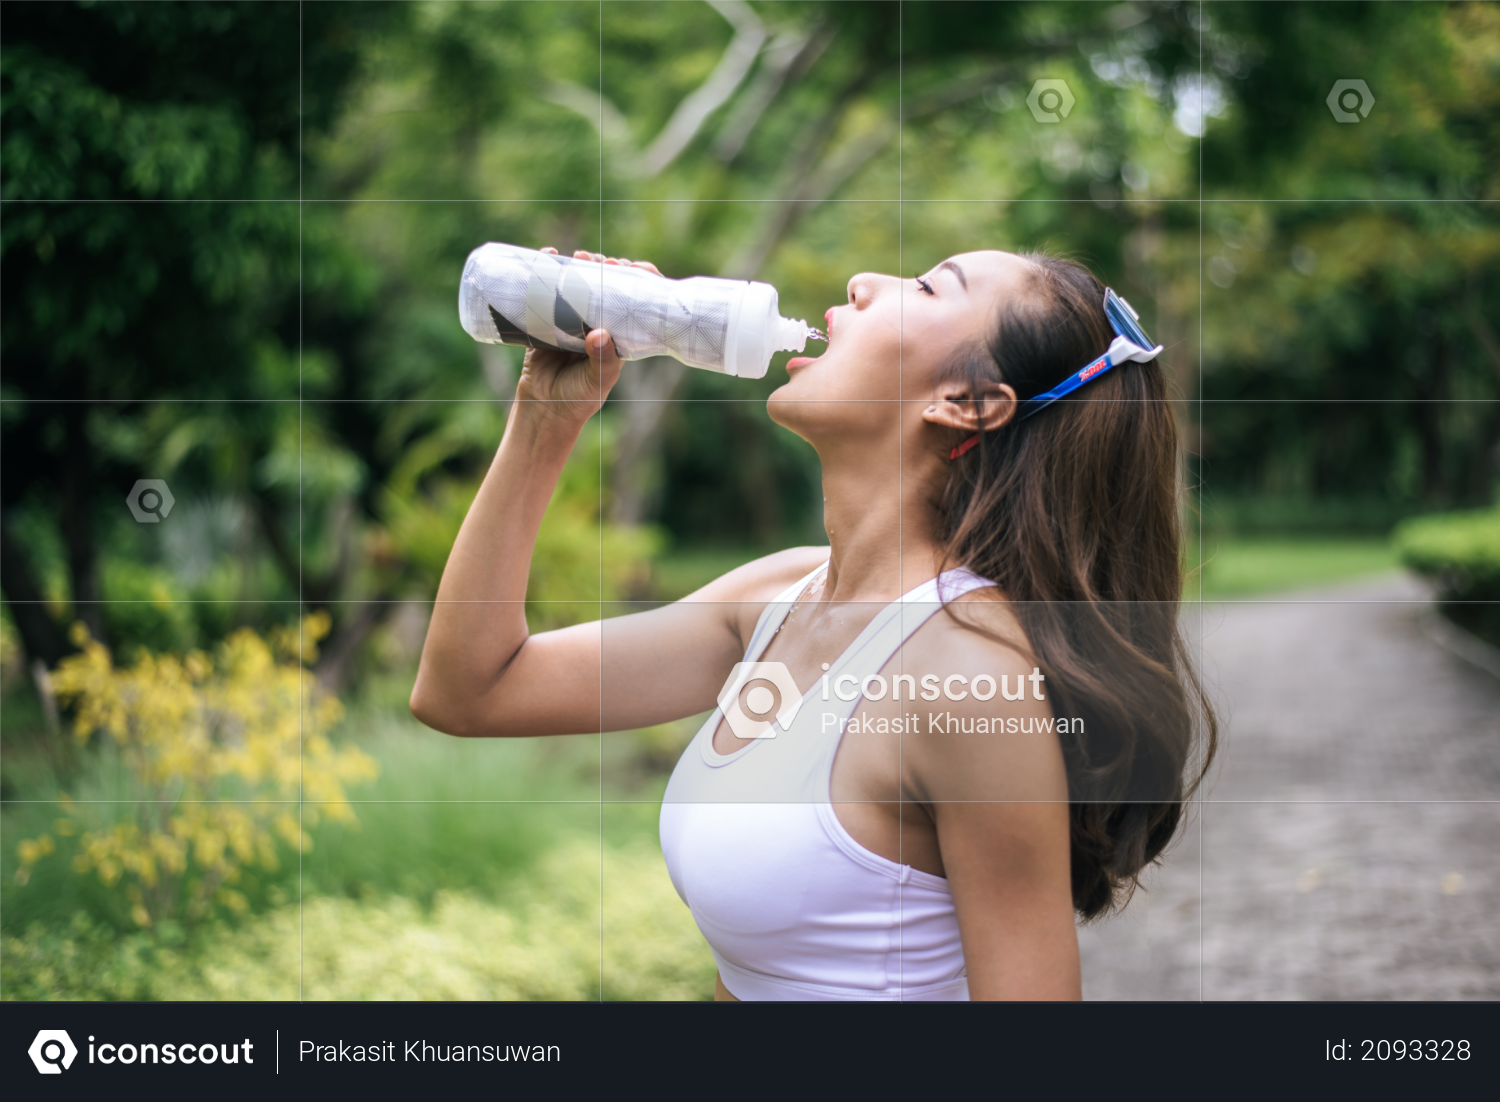 Download Premium Young Healthy Woman Drinking Water From Plastic Bottles After Jogging Health And Sport Concept Photo Download In Png Jpg Format PSD Mockup Templates